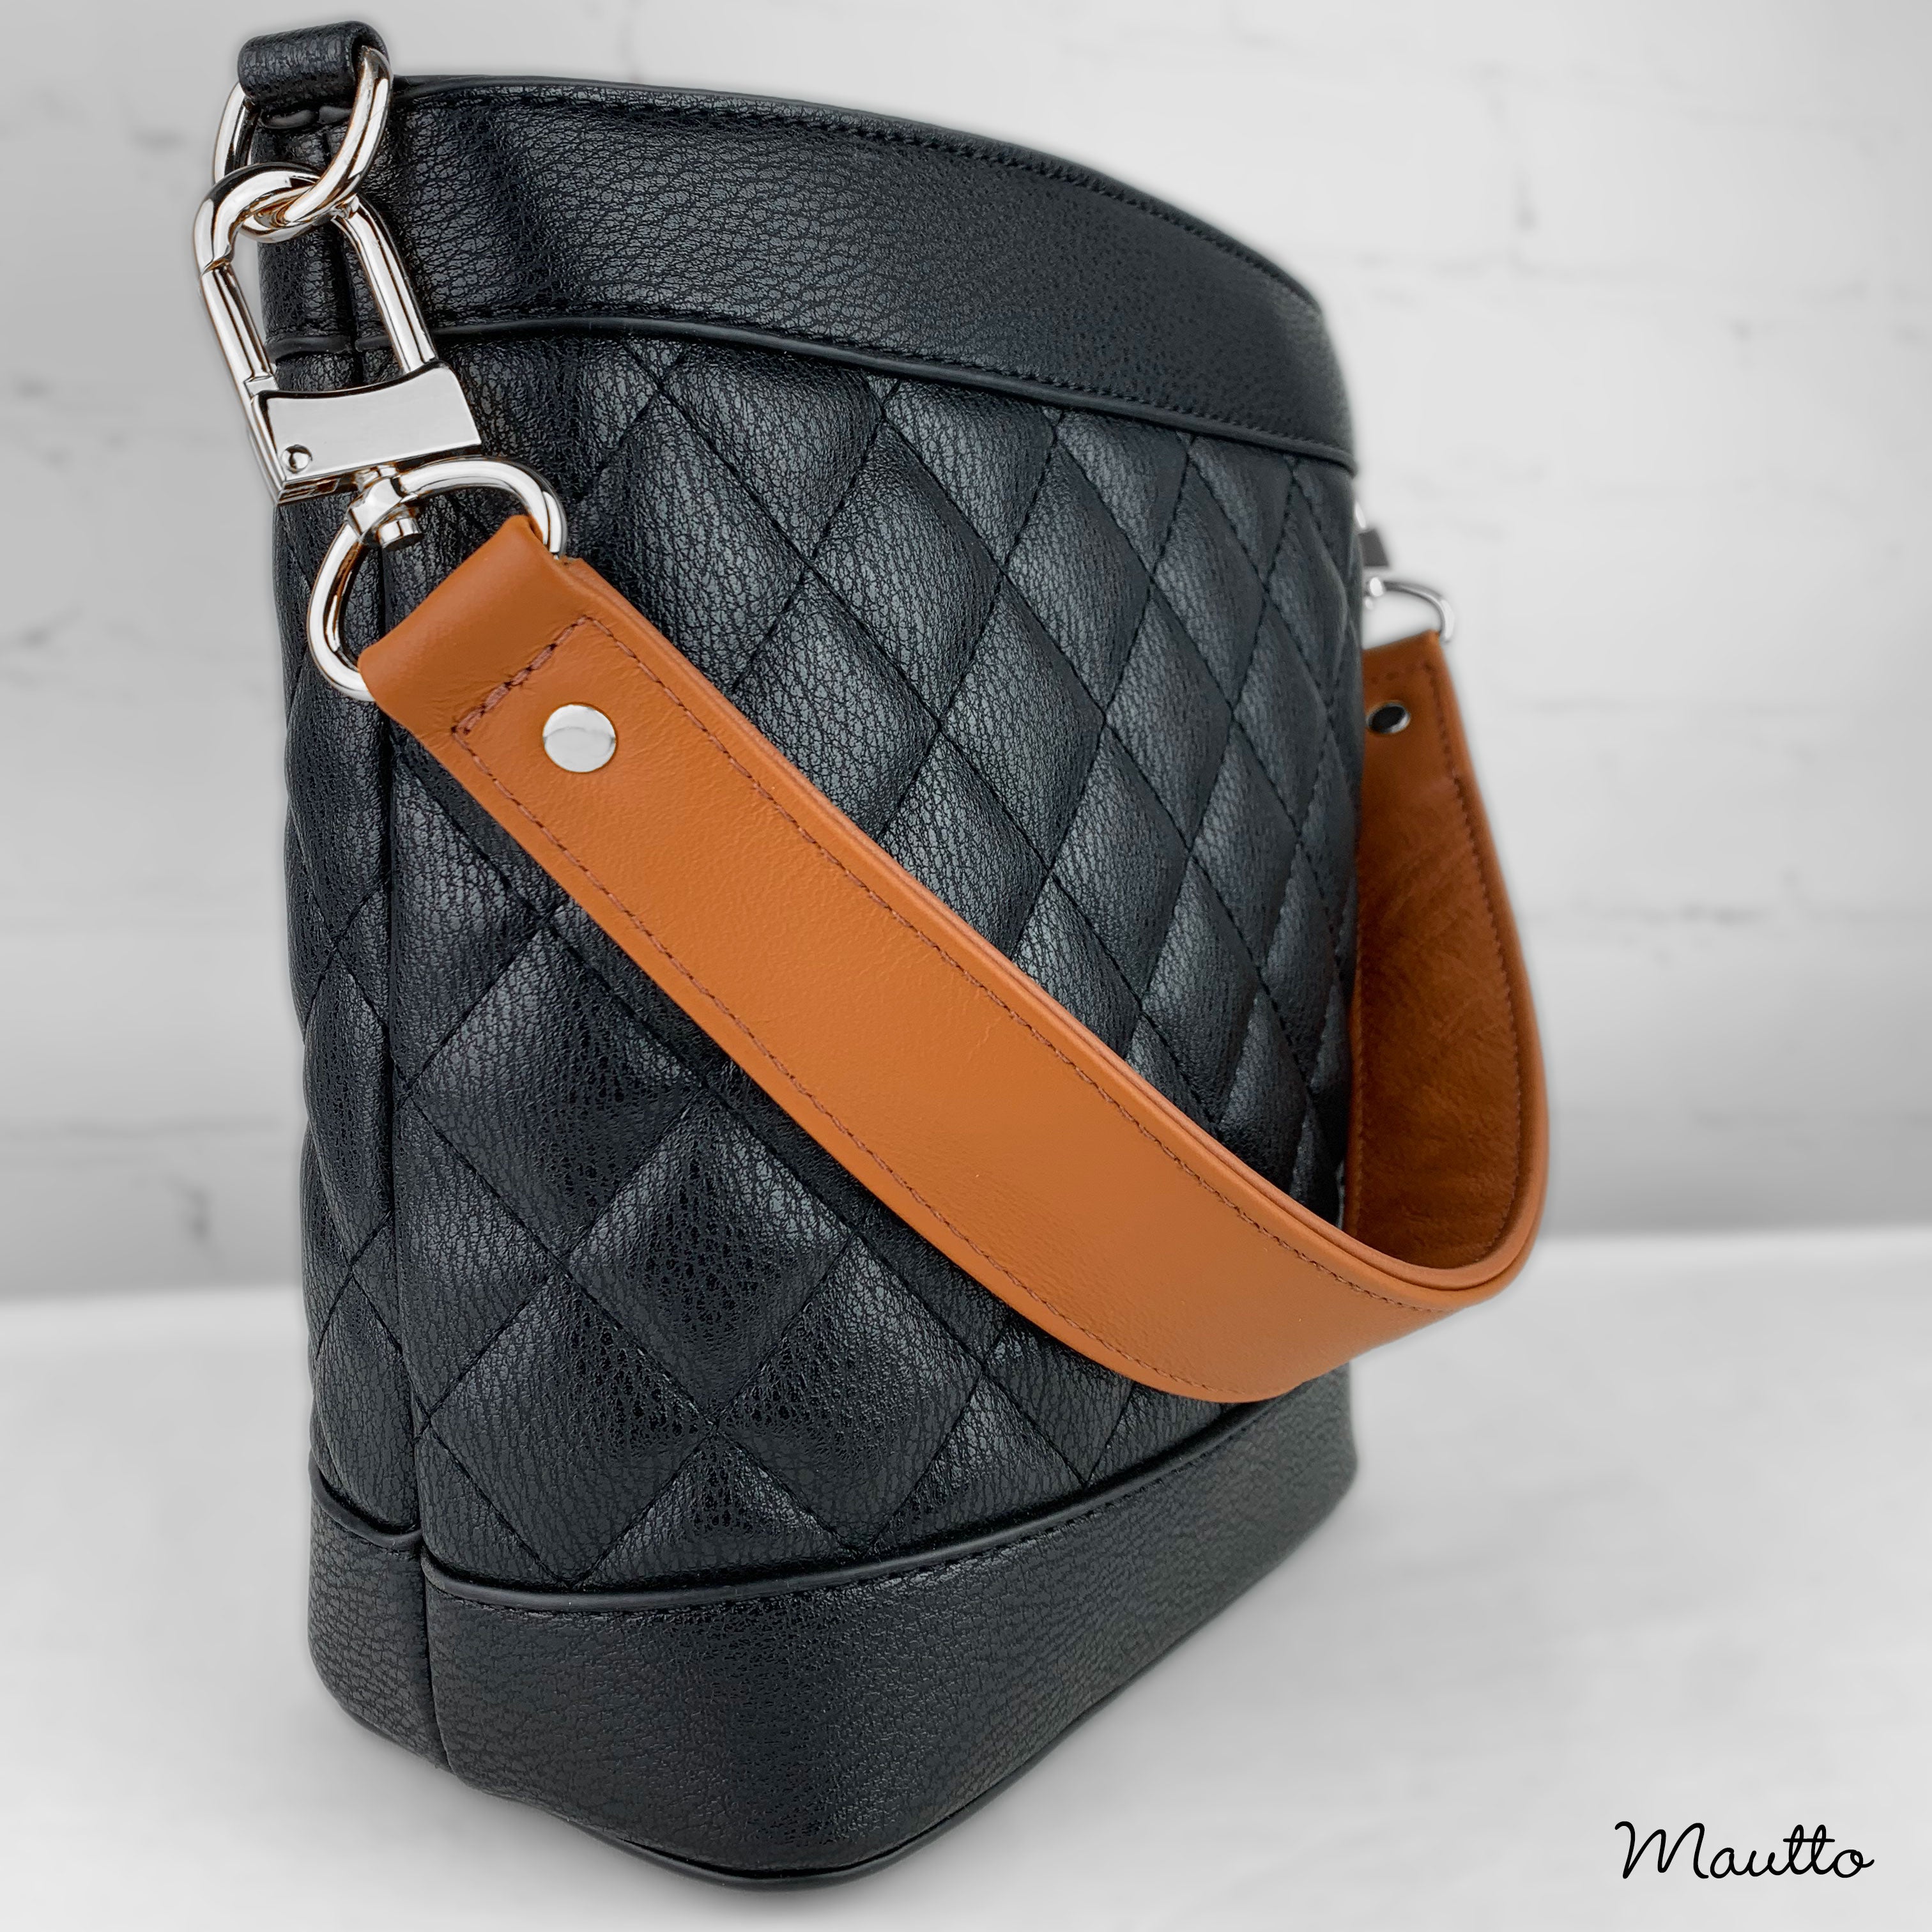 Tapered Width Leather Strap, Handle or Short Shoulder - 18 inch Length, 1.5 inch (38mm) Middle to 1 inch (25mm) Ends - Choose Silver-tone Connector Style